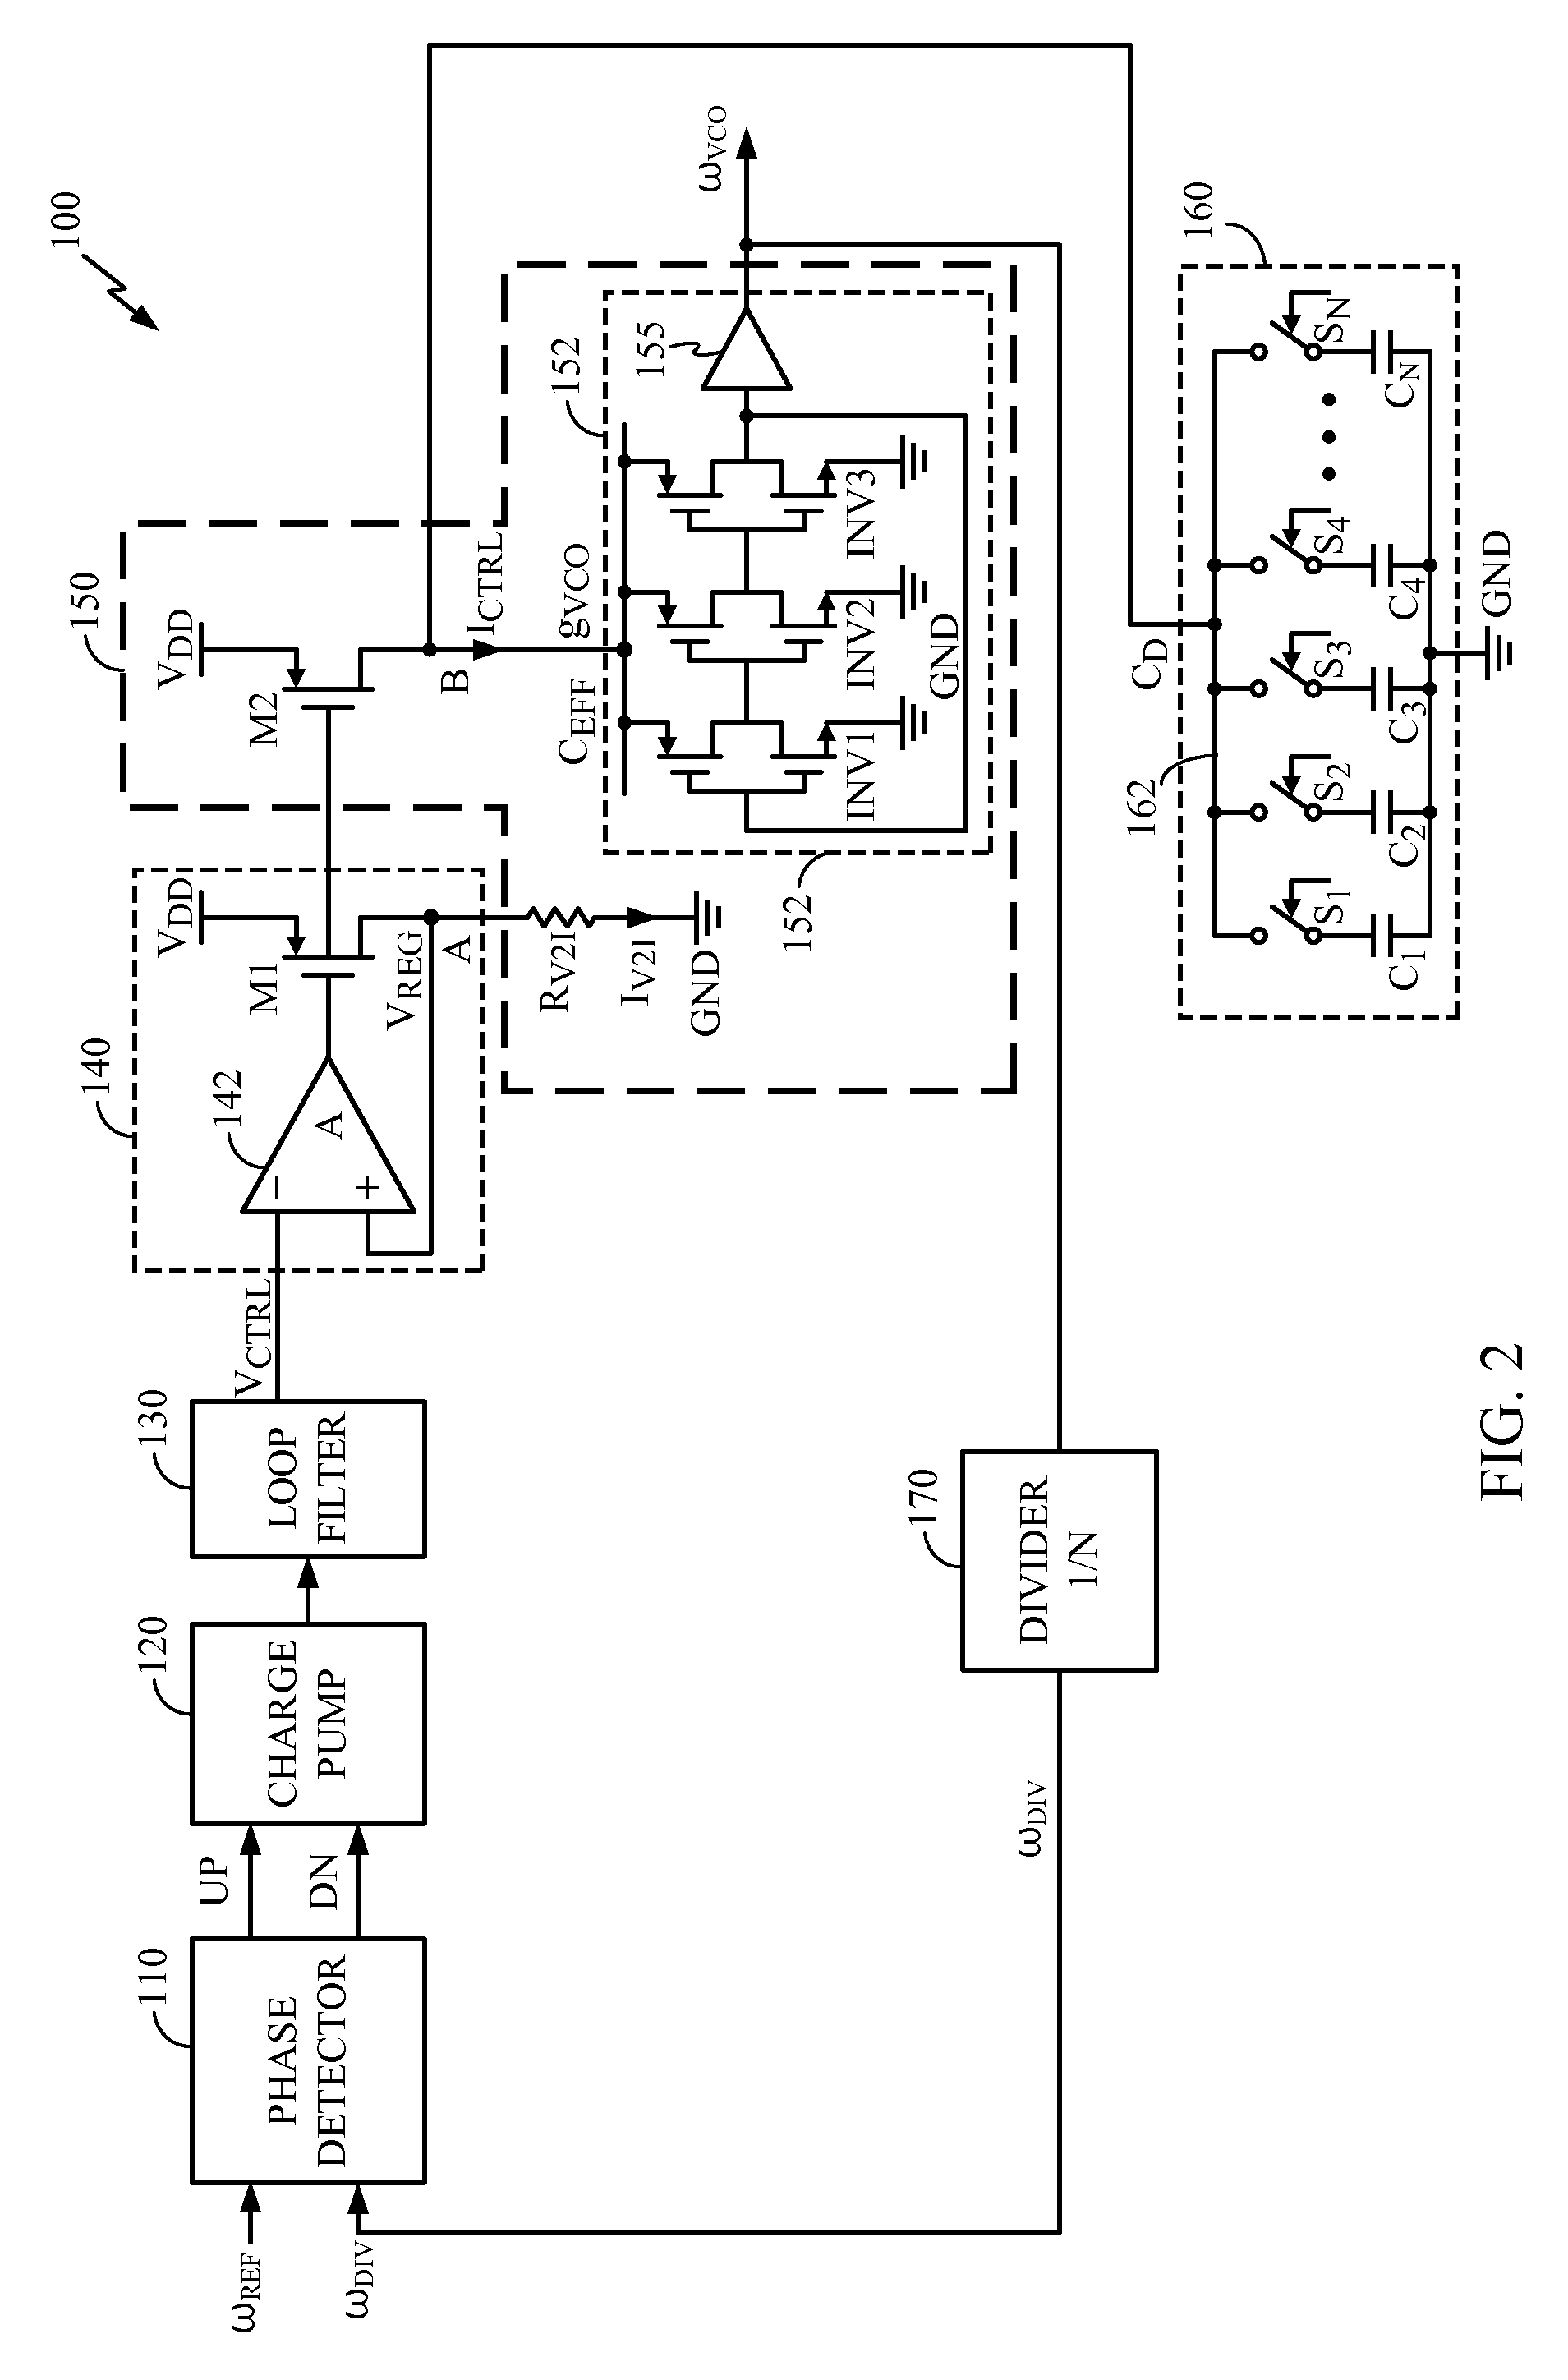 Supply-Regulated Phase-Locked Loop (PLL) and Method of Using